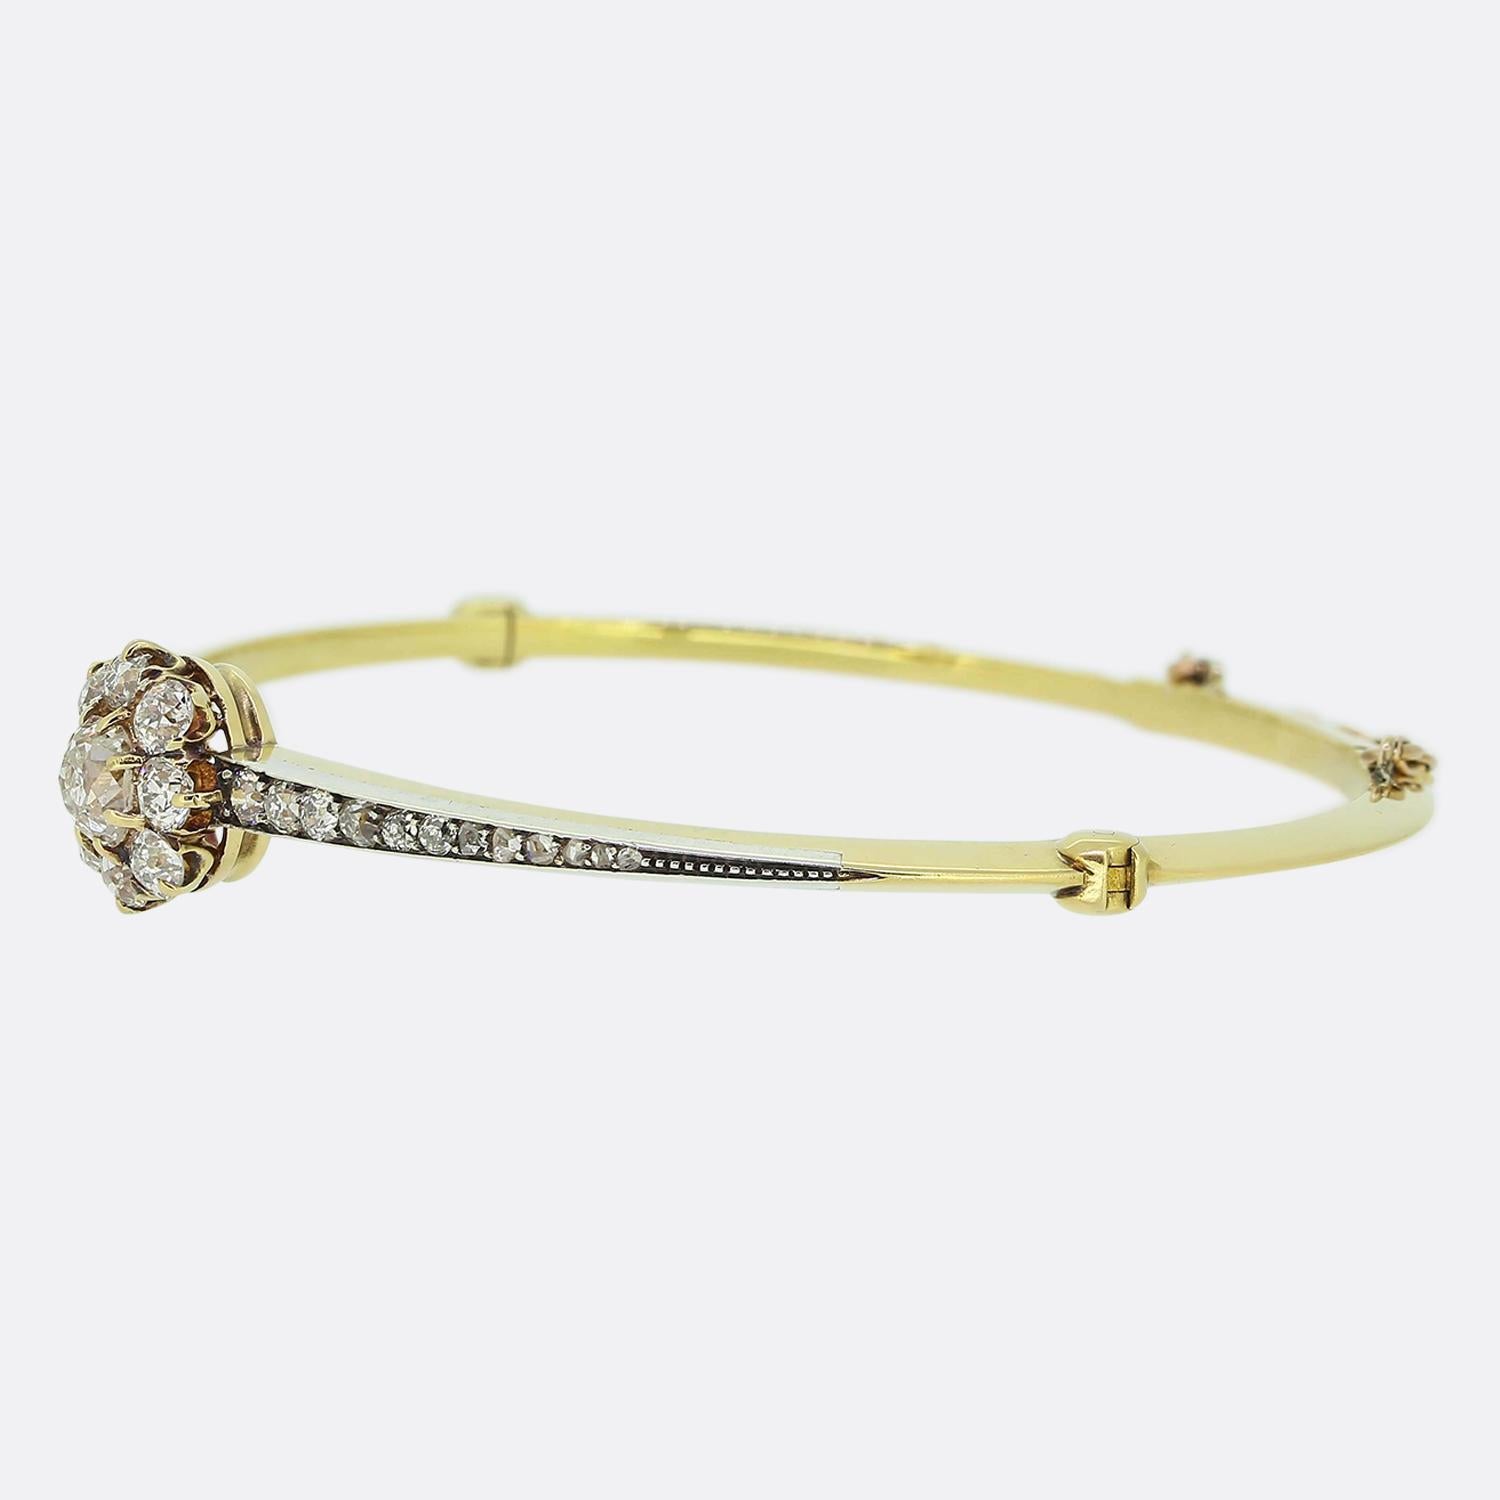 Here we have a sensational diamond bangle taken from the Edwardian era. This antique piece has been crafted from 18ct yellow gold and features a sleek knife edge band which neatly wraps around the wrist. This elegant design plays host to a focal